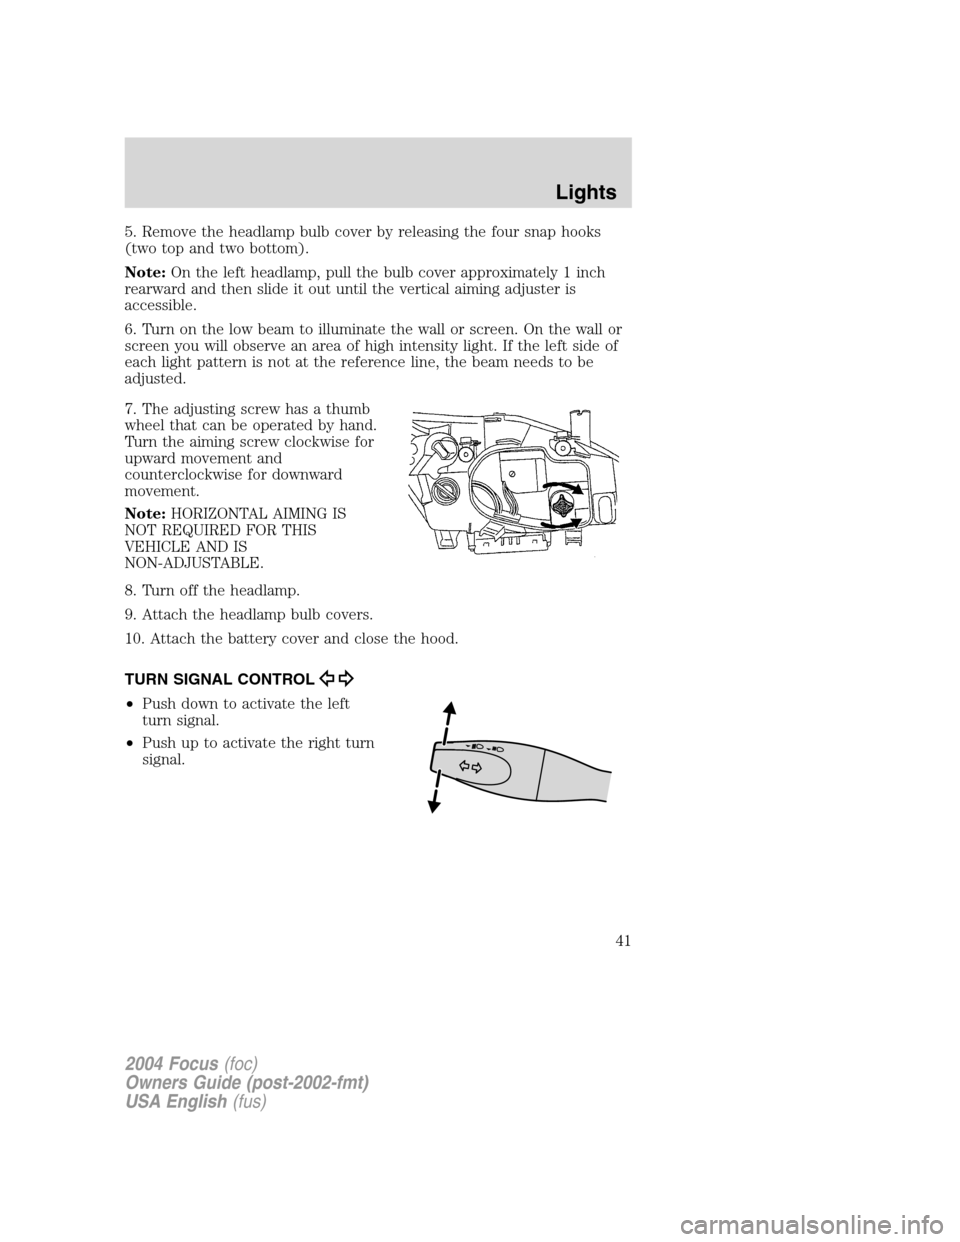 FORD FOCUS 2004 1.G Owners Manual 5. Remove the headlamp bulb cover by releasing the four snap hooks
(two top and two bottom).
Note:On the left headlamp, pull the bulb cover approximately 1 inch
rearward and then slide it out until th